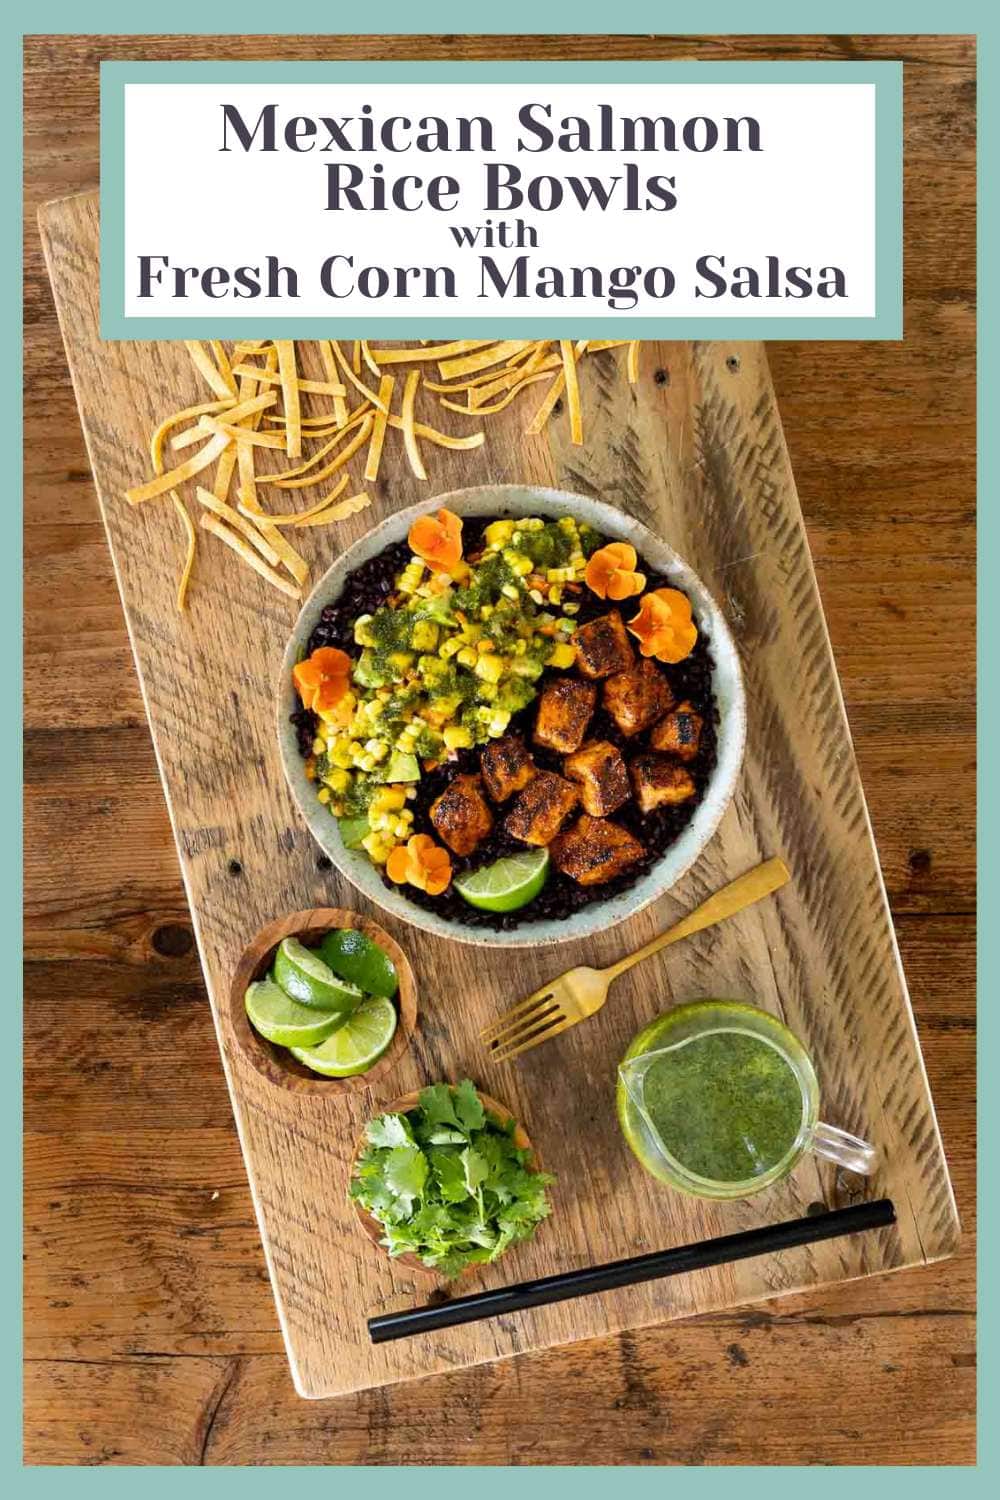 Mexican Salmon Rice Bowls with Fresh Corn and Mango Salsa